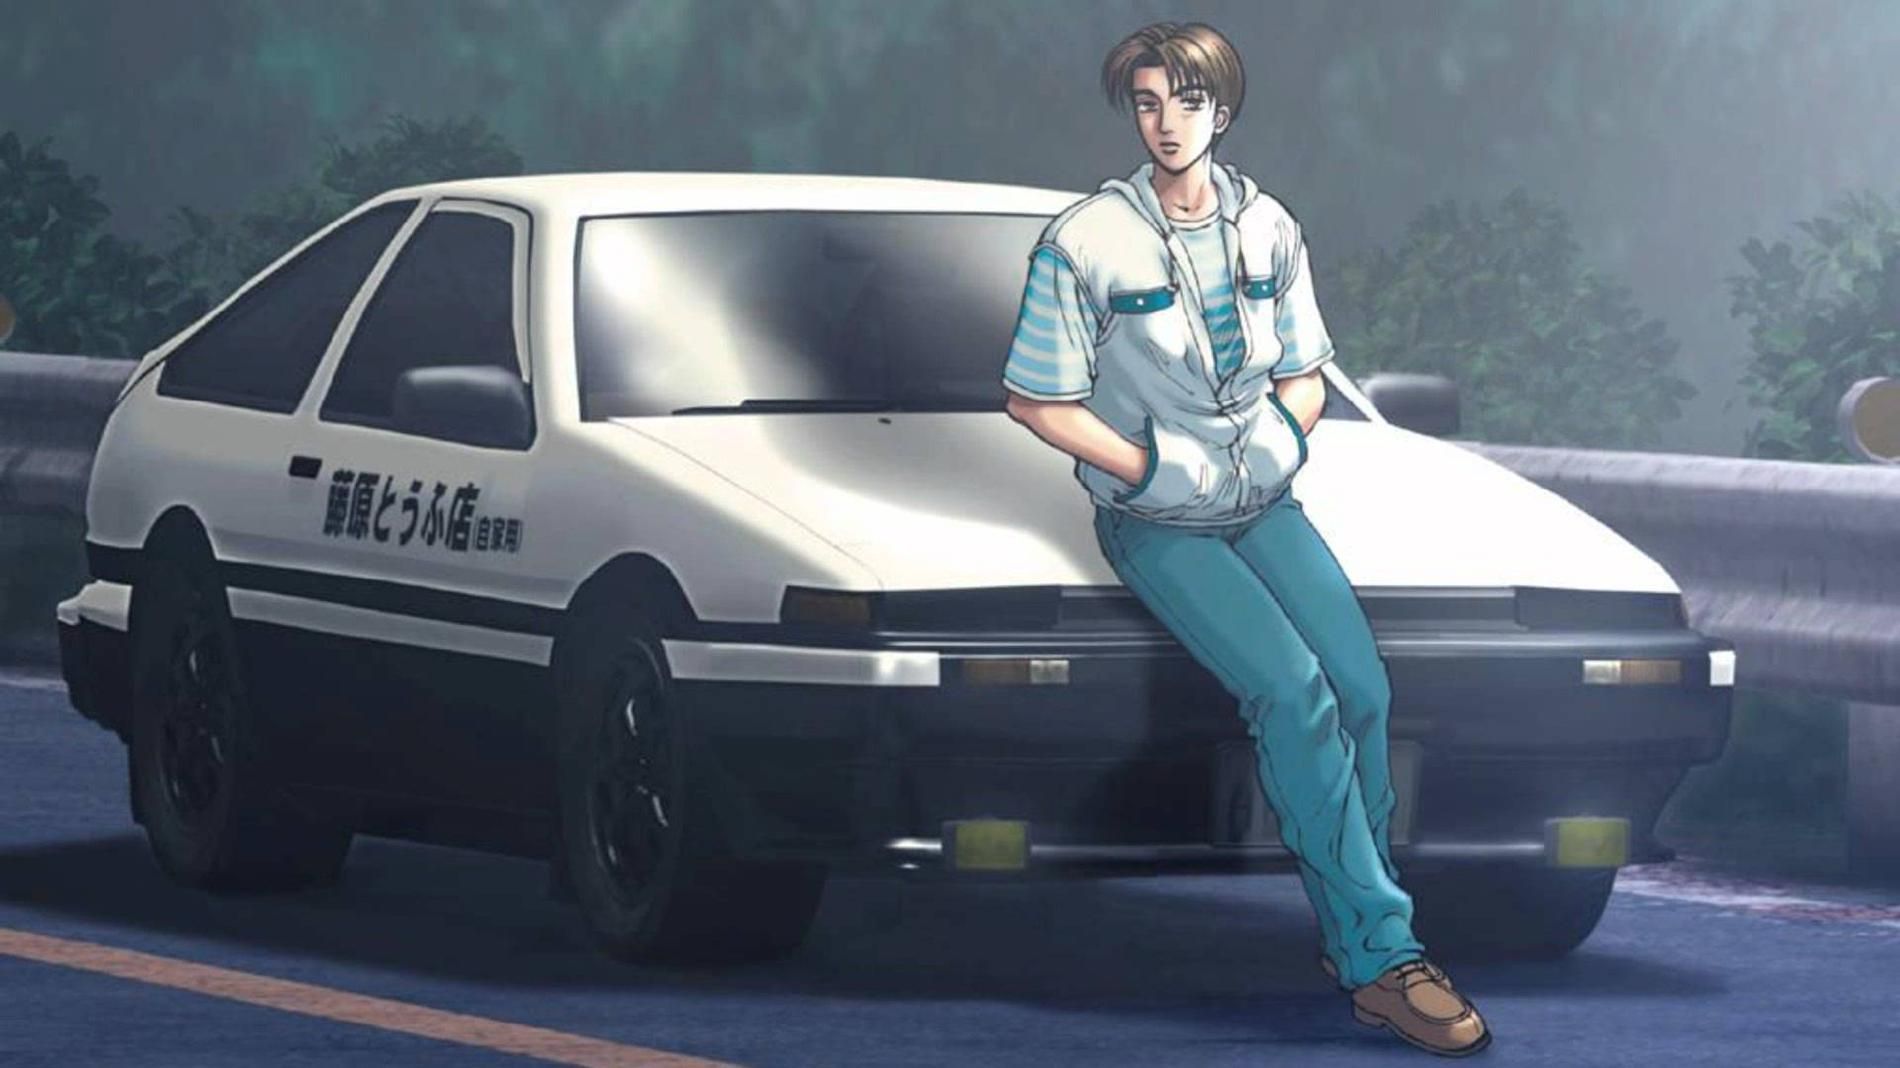 Deja Vu Initial D Letras Com See your body into the moonlight even if i try to cancel all the pictures into the mind there's flashing in my eyes. deja vu initial d letras com